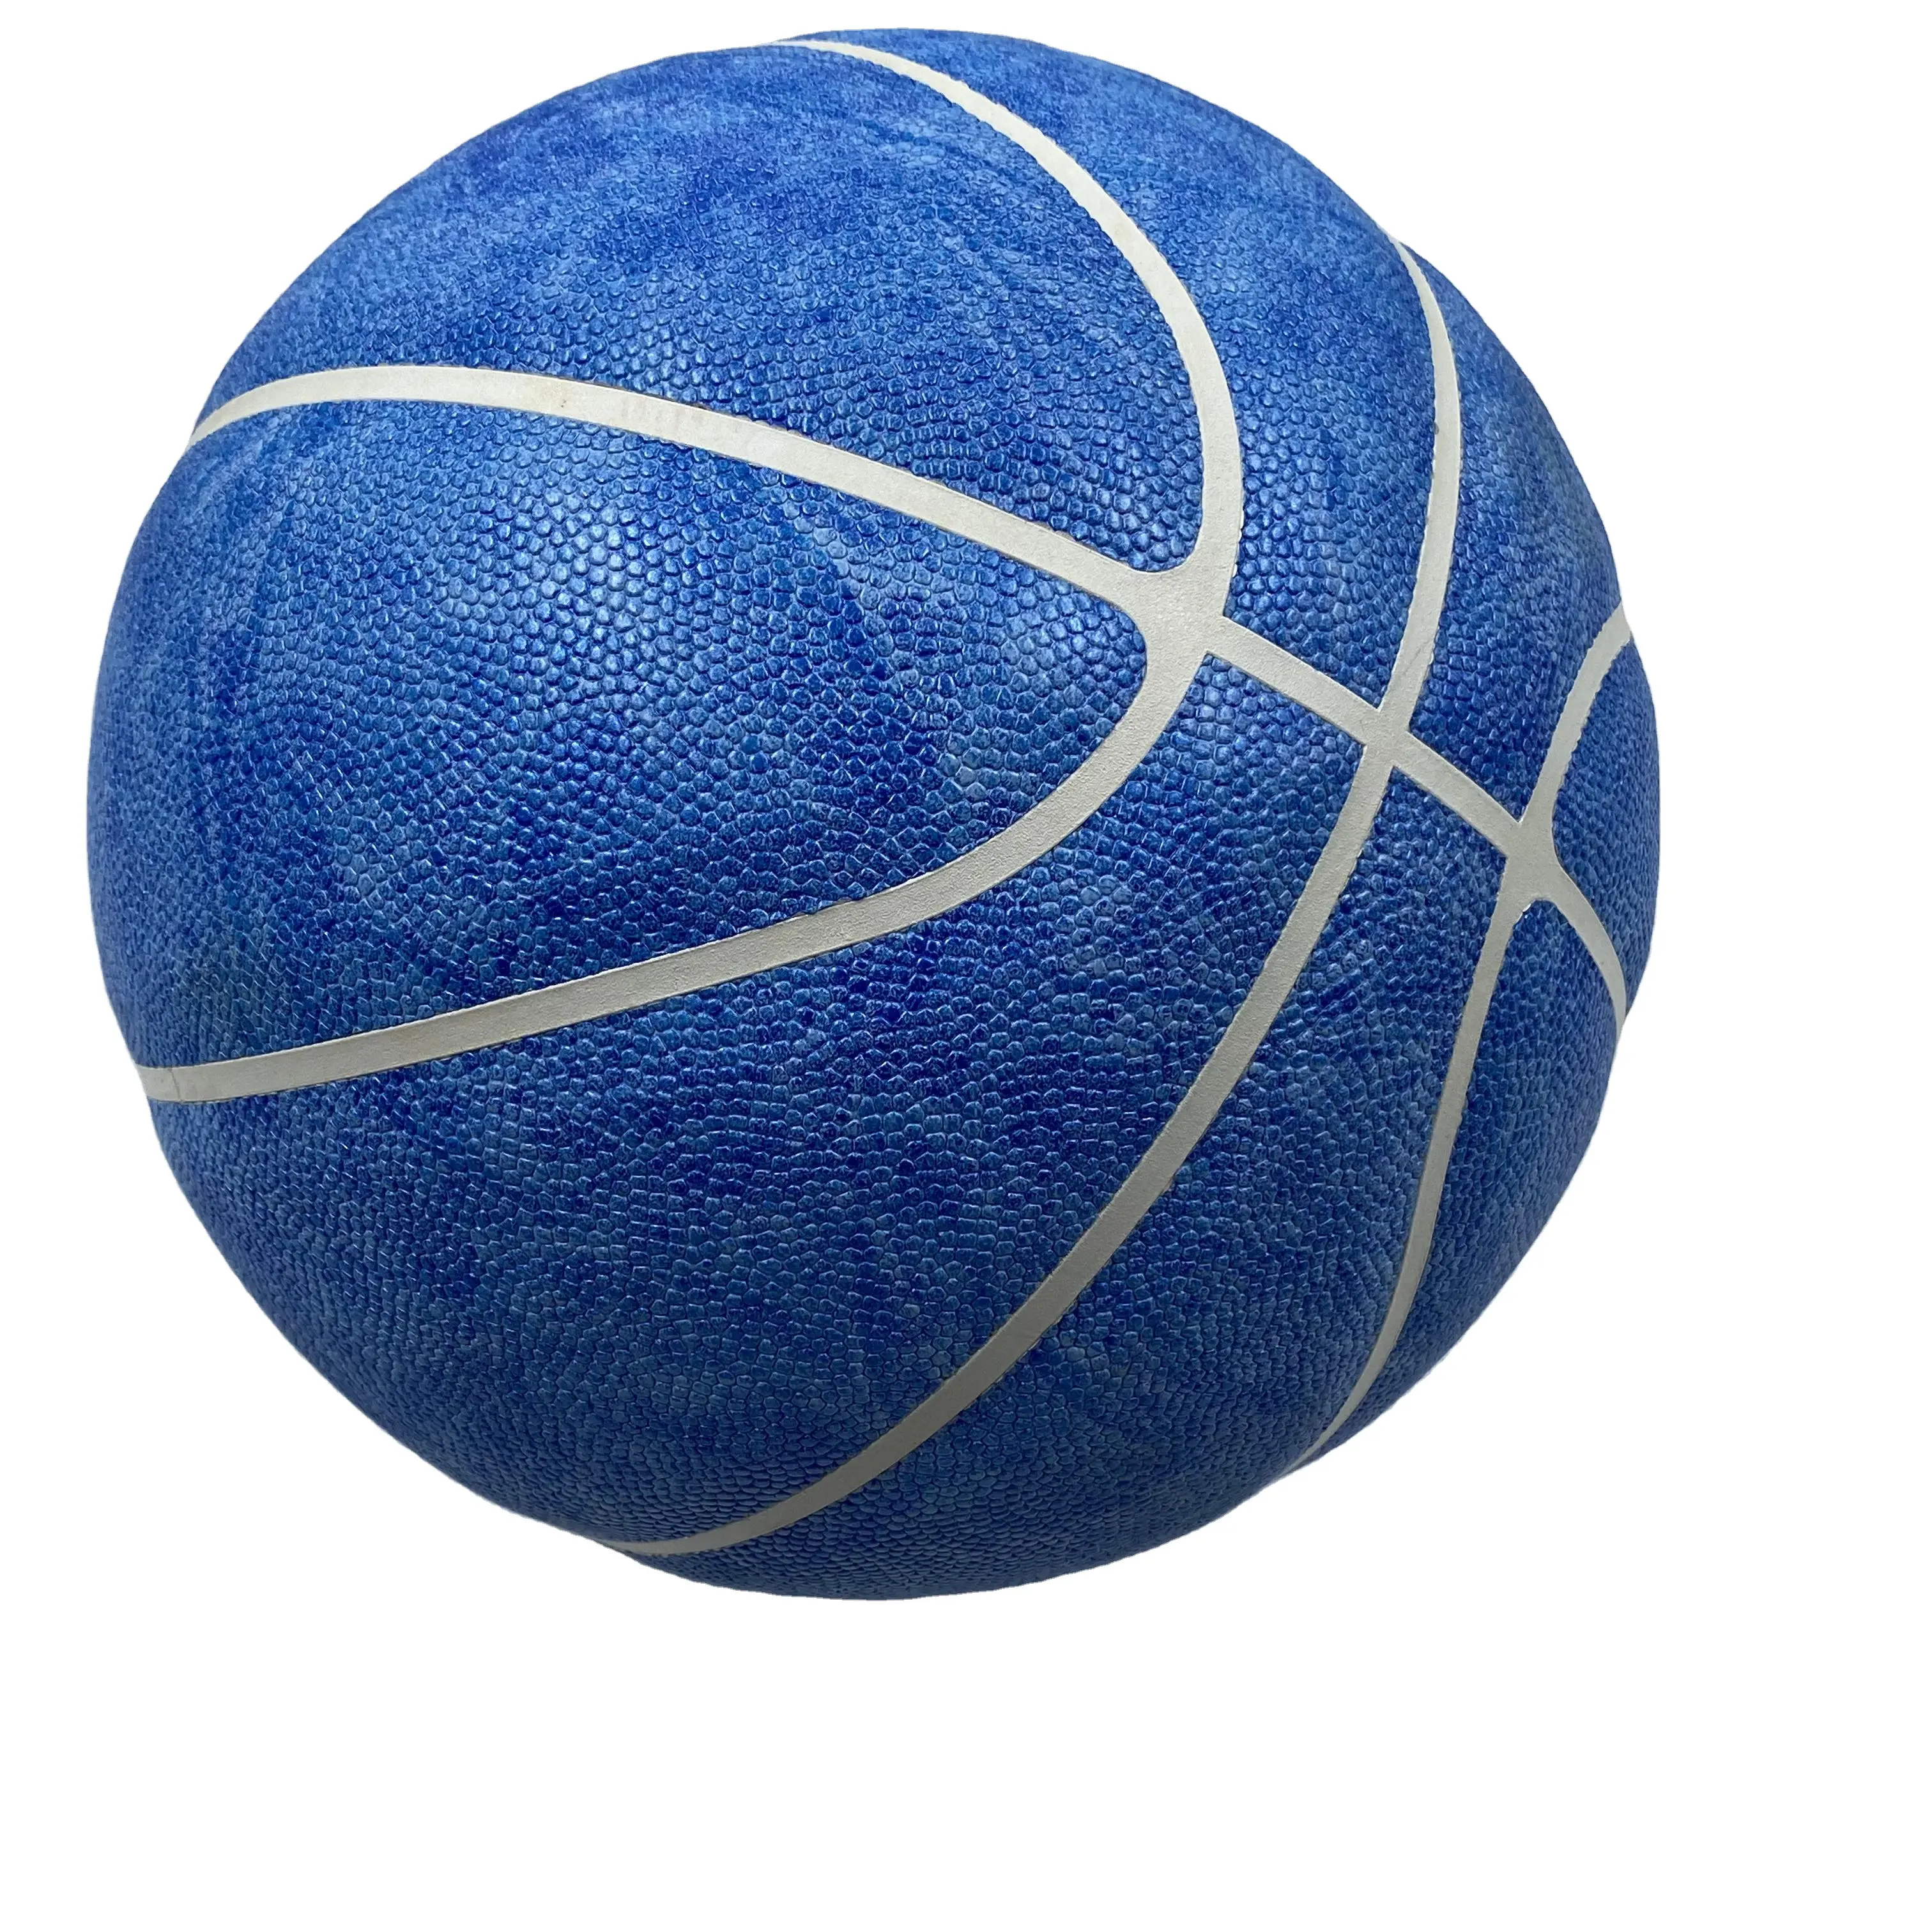 White strap basketball Customized color blue Leather basketball Outdoor Basketball